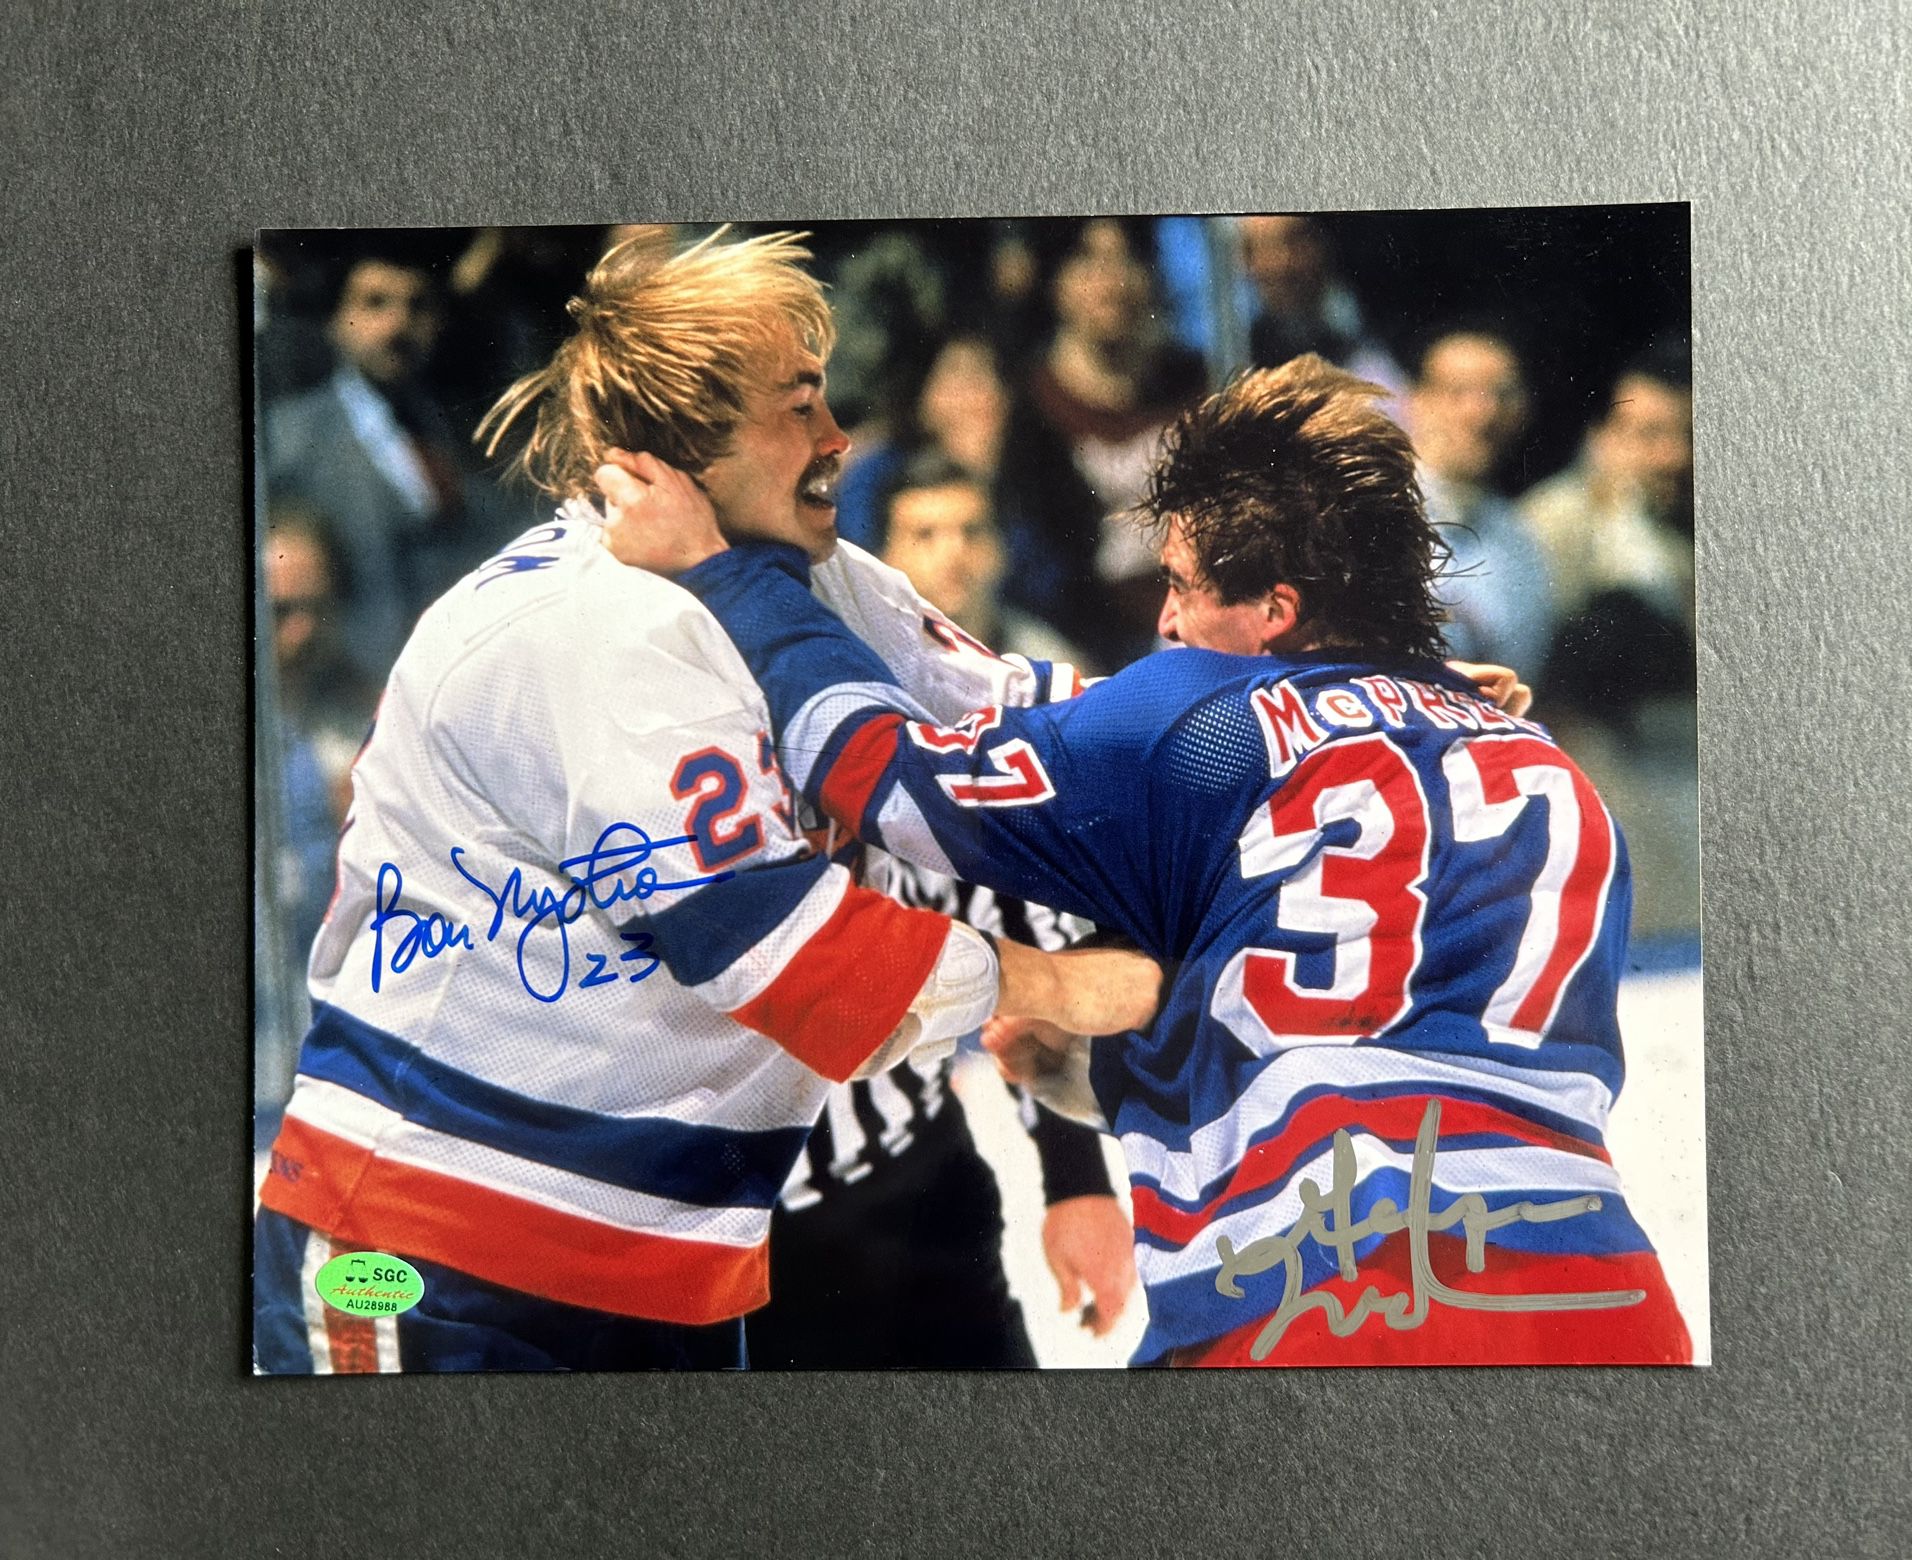 B. Nystrom/G. McPhee Dual signed 8x10. SGC Authenticated Autographs. Negotiable 